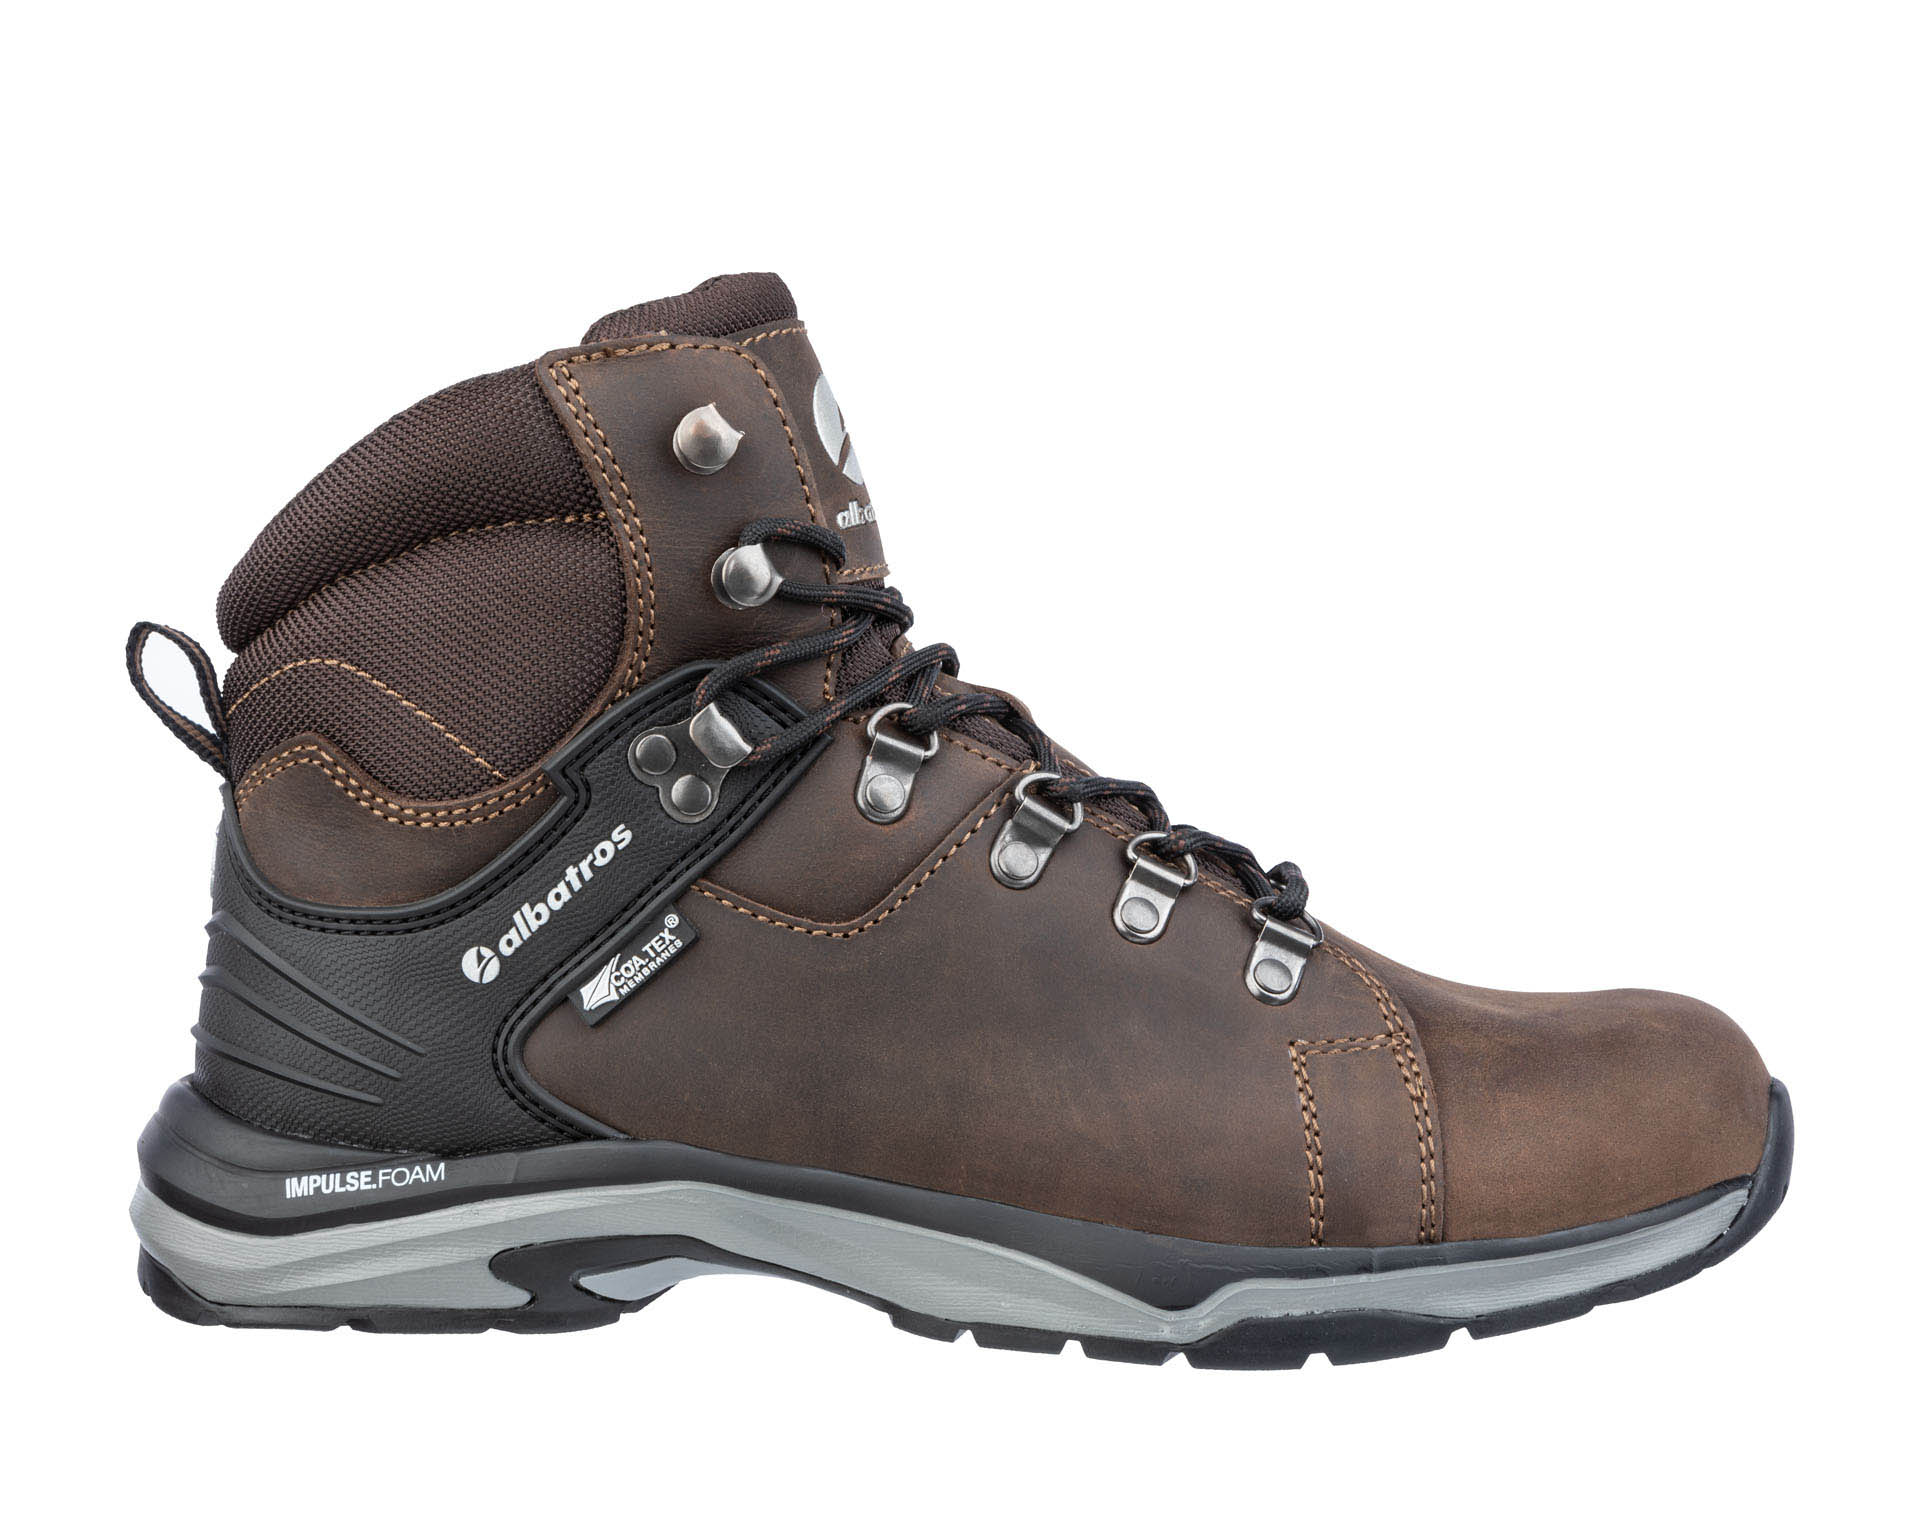 Occupational Shoes O2 | Trekking- & Occupational Shoes | Shoes | Woman ...